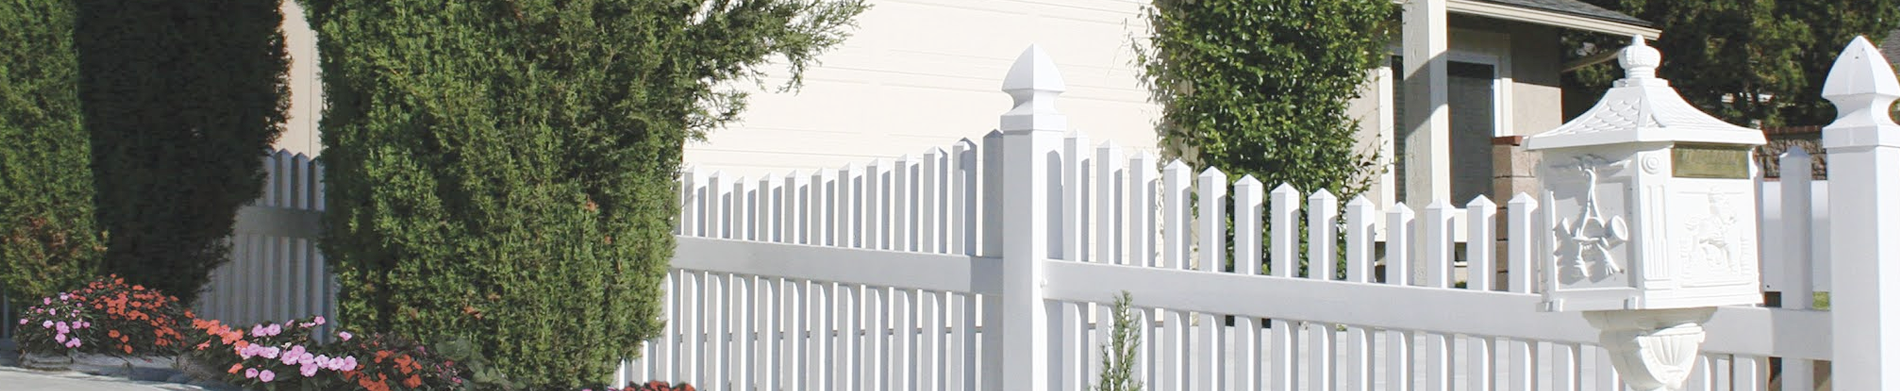 Installing a beautiful vinyl fence around your home in Orange County